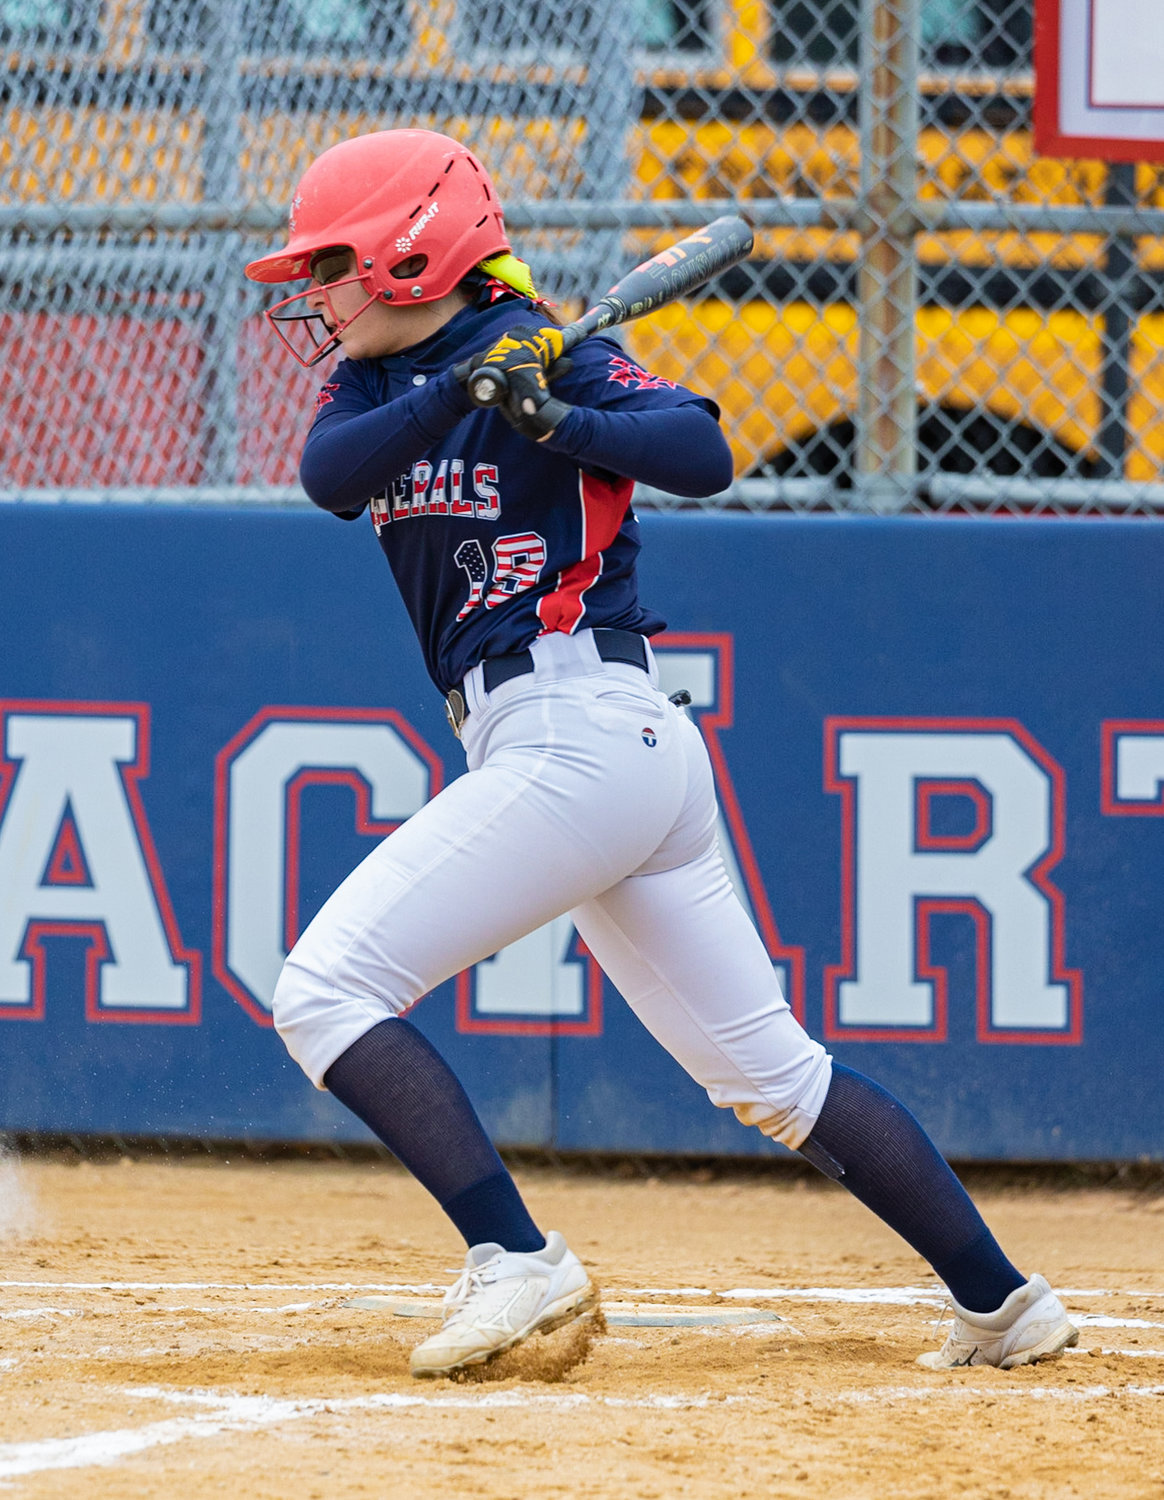 Chiara Nappo entered her senior campaign off a red-hot 2021 season that saw her bat .393 and earn All-County honors.